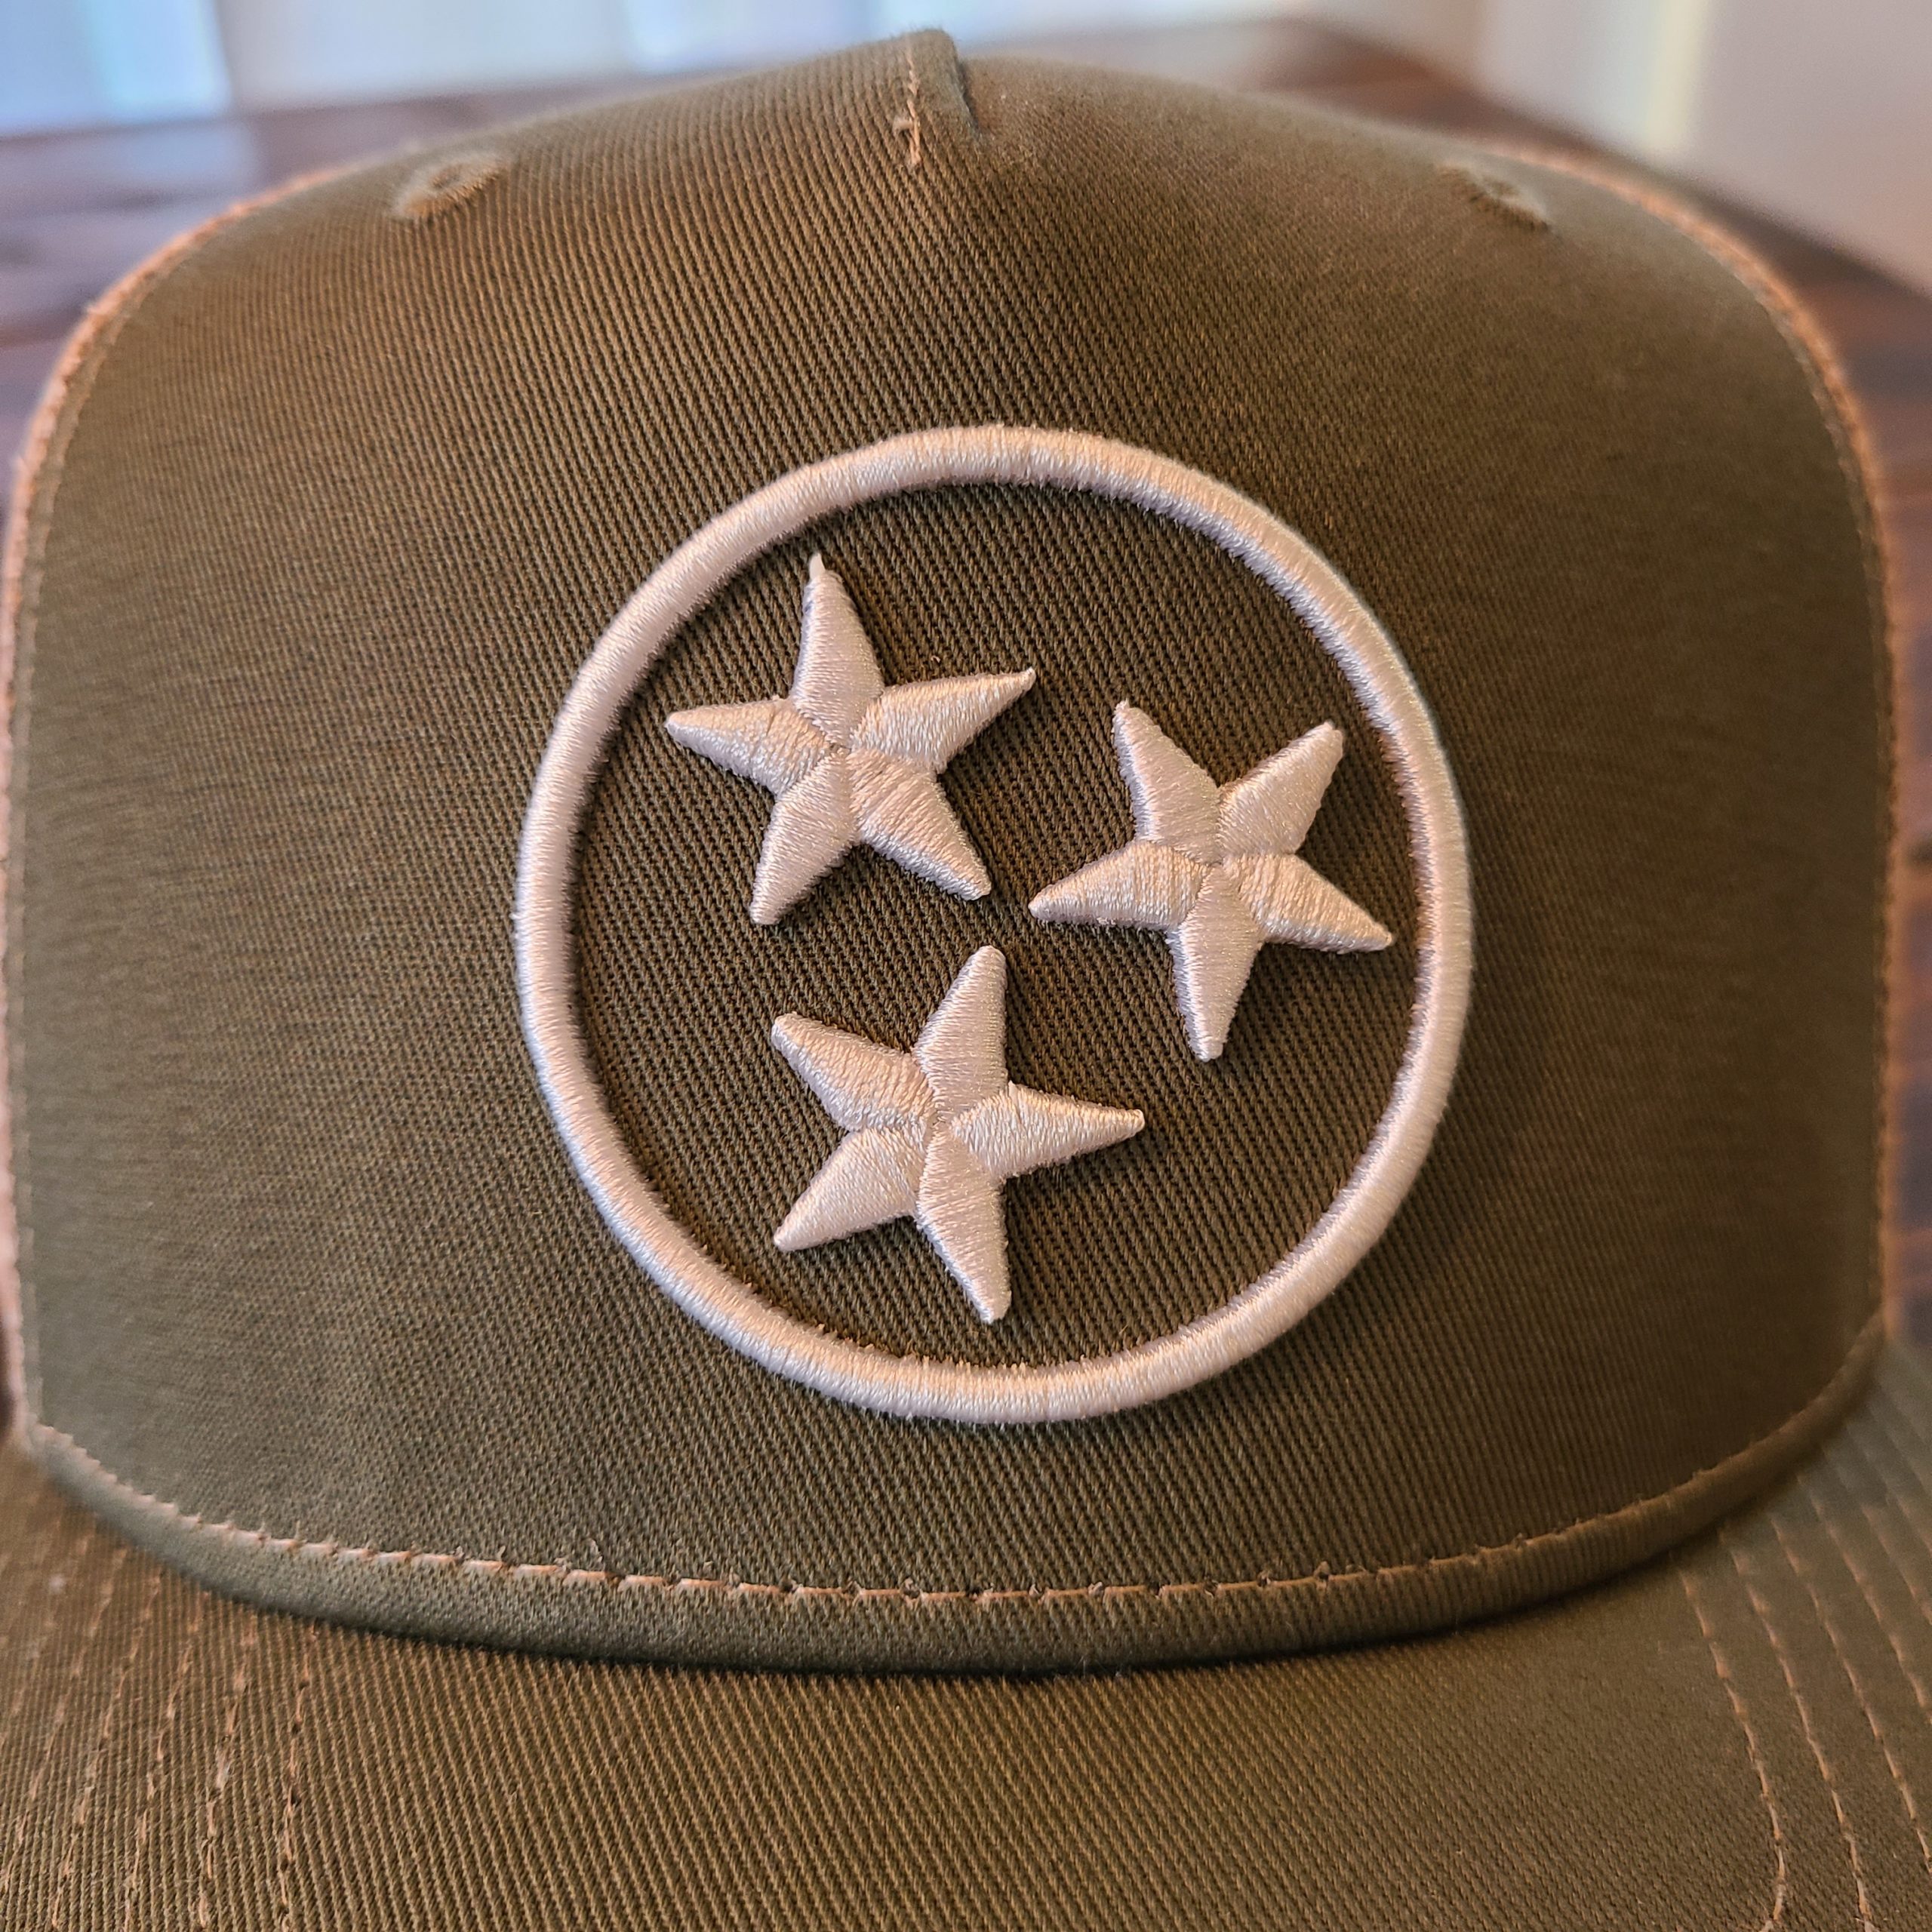 Tristar Embroidered Trucker Hat [Green/Tan/White]